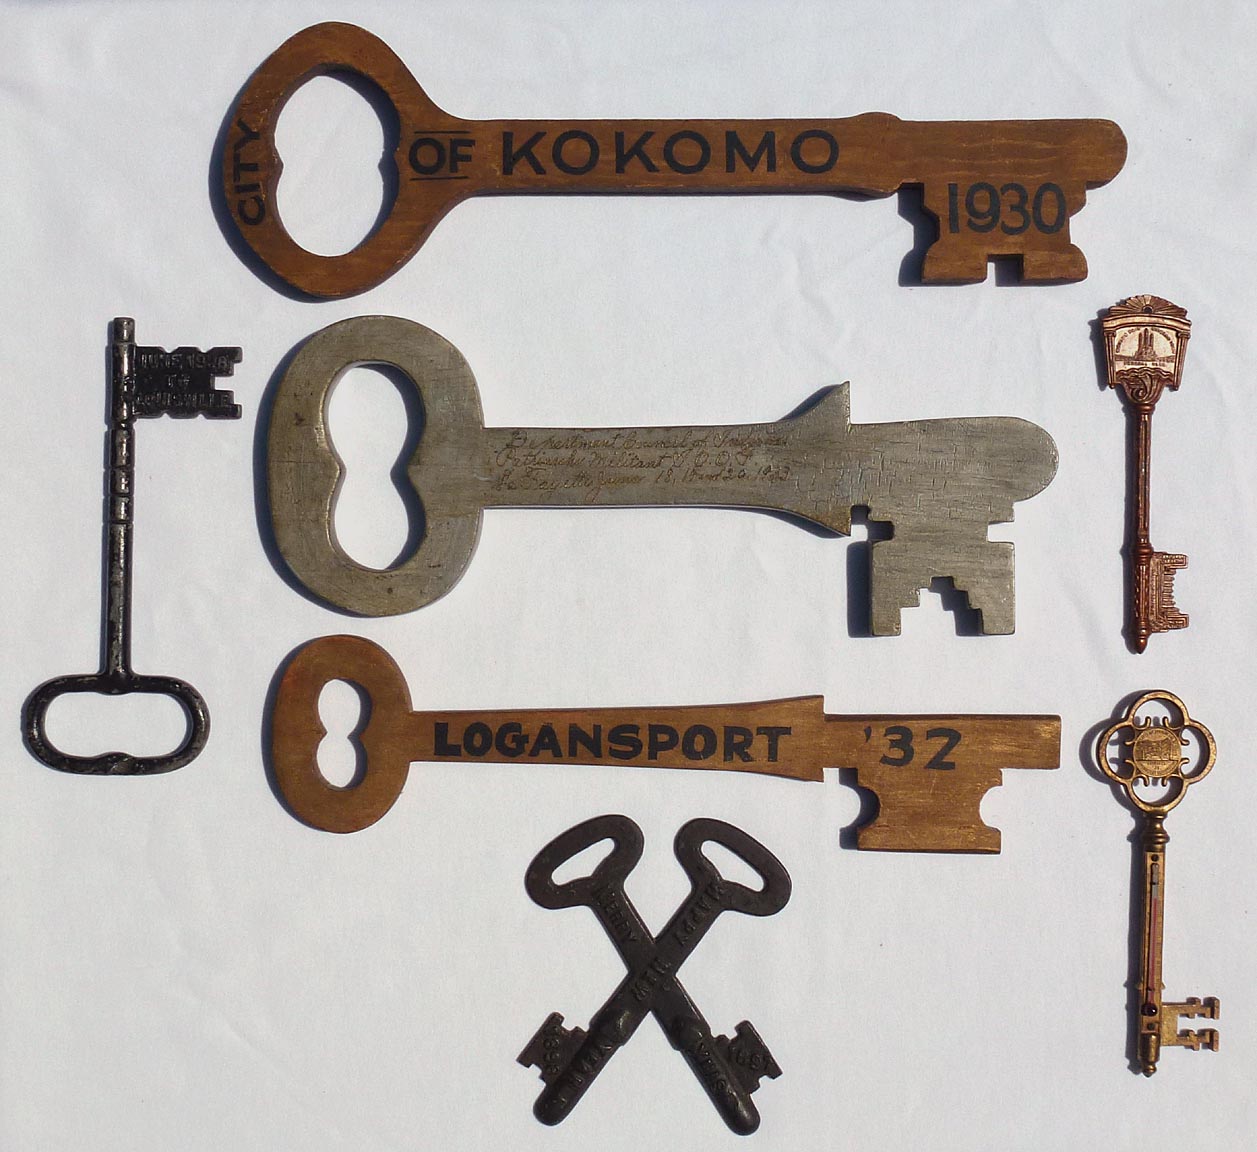 Collection of large ceremonial keys